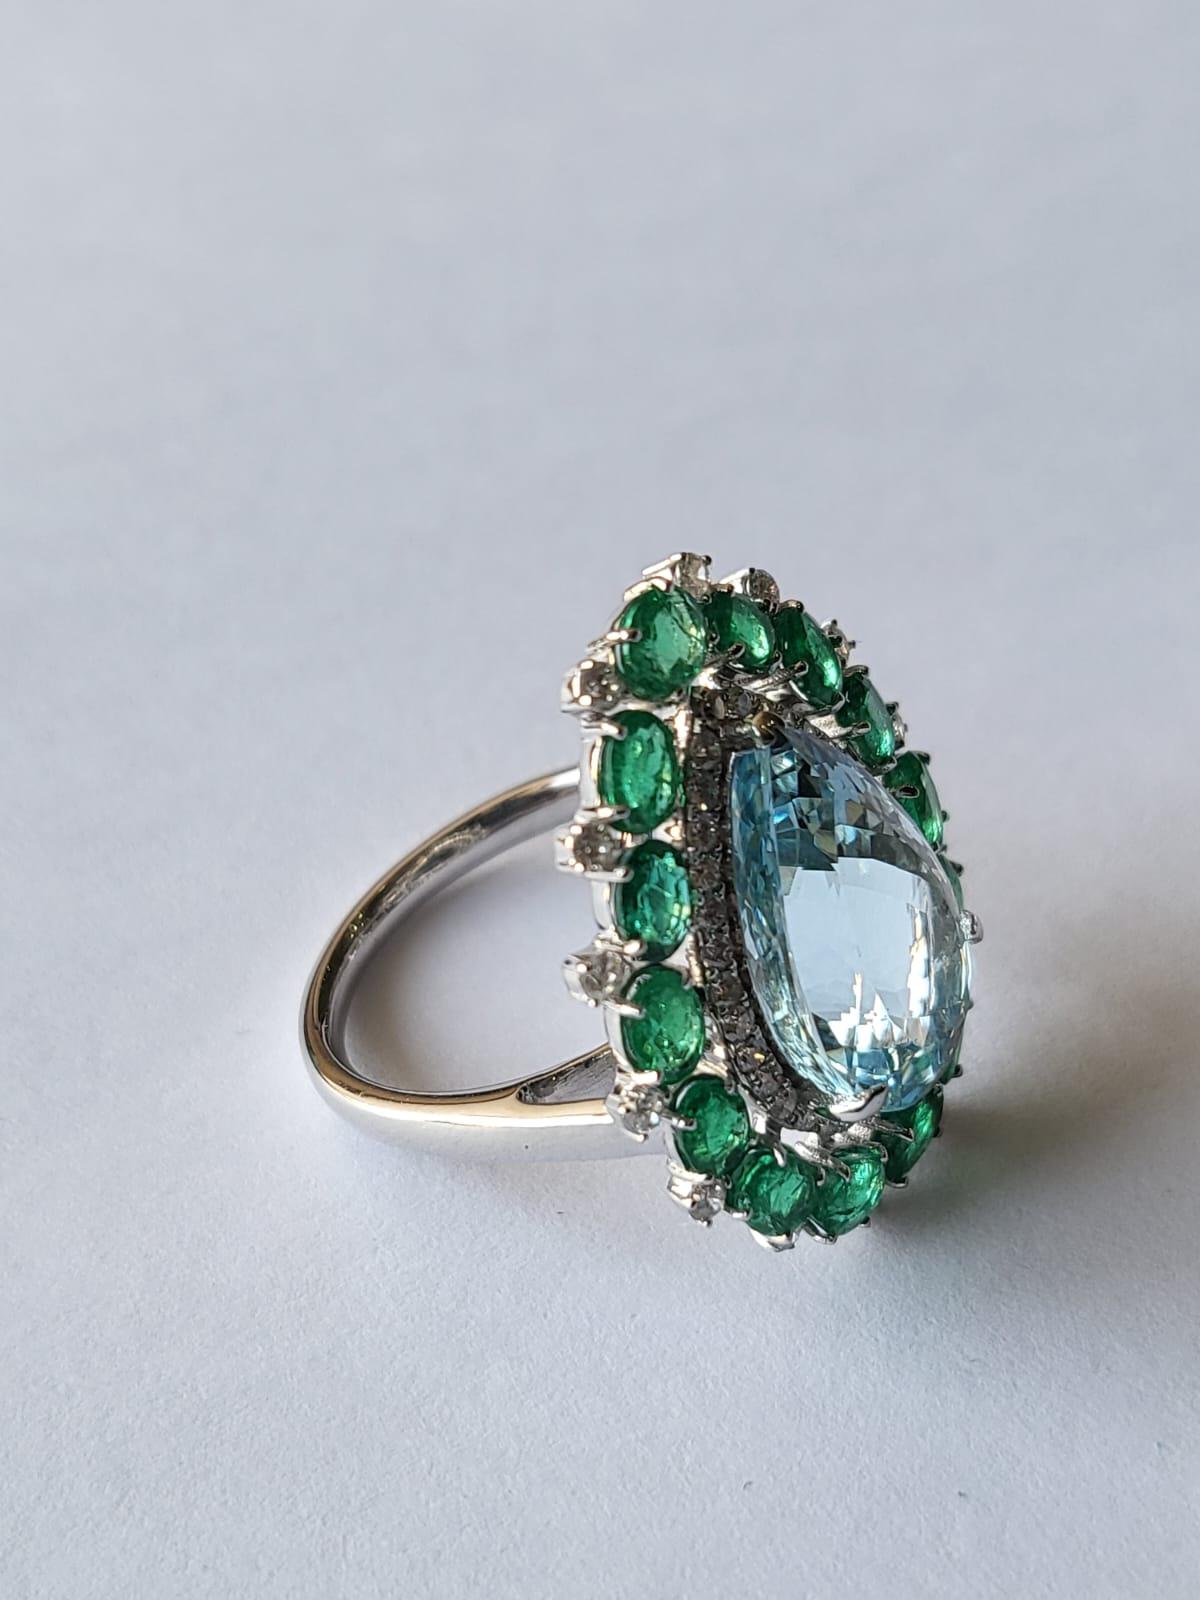 A very gorgeous and one of a kind, Aquamarine & Emerald Cocktail / Engagement Ring set in 18K White Gold & Diamonds. The weight of the pear shaped Aquamarine is 5.51 carats. The weight of the Emeralds is 2.10 carats. The Emeralds are completely